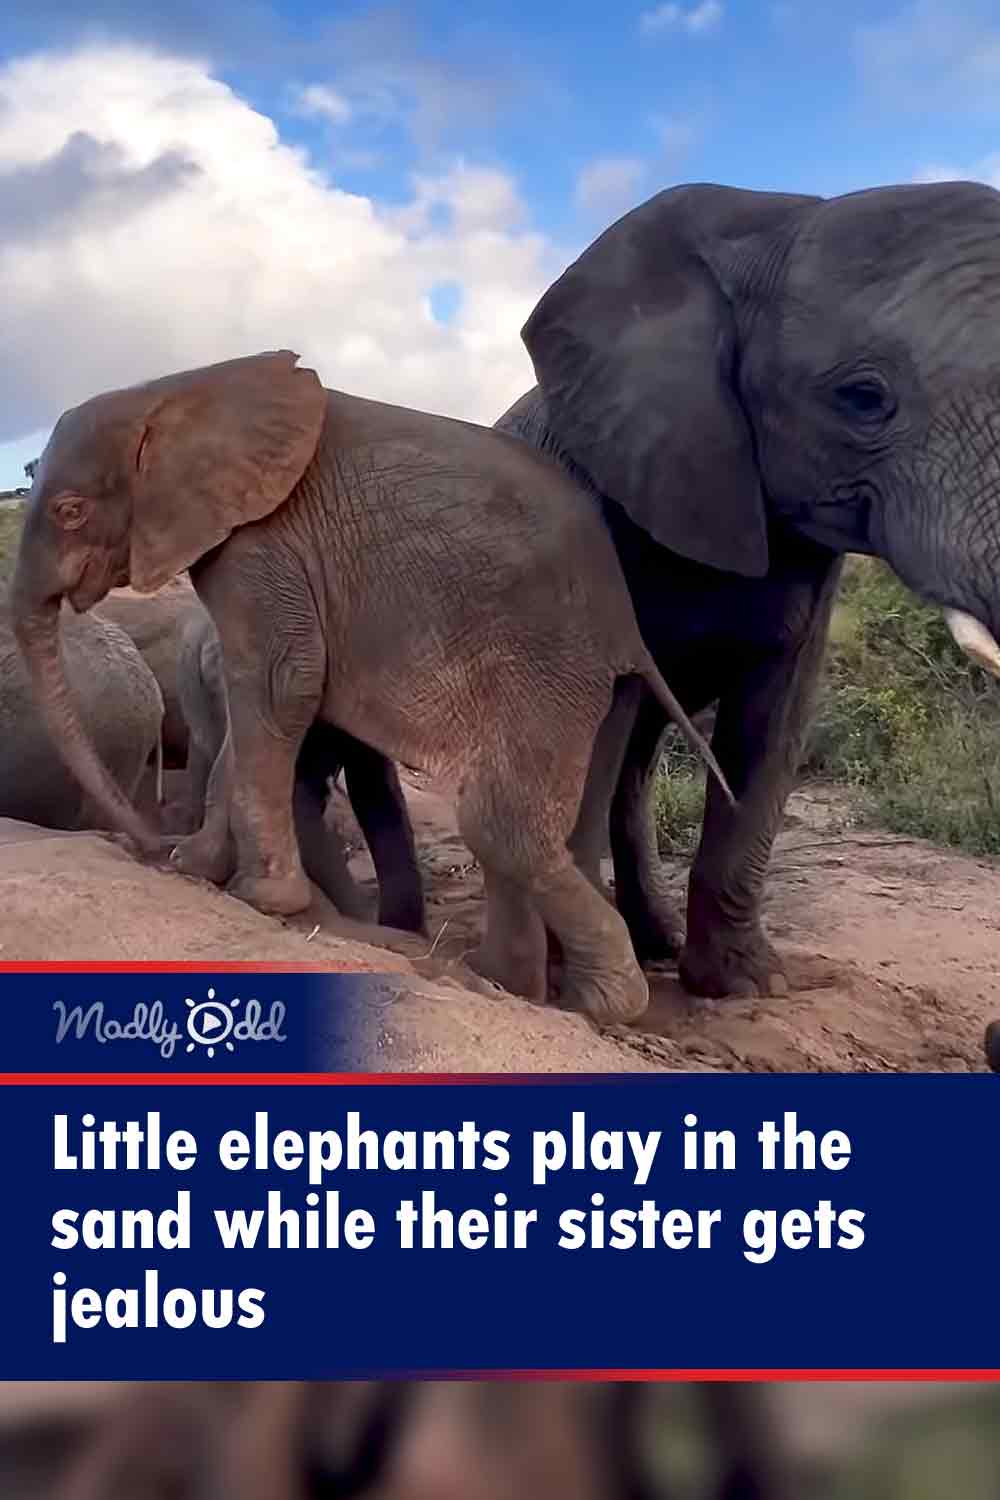 Little elephants play in the sand while their sister gets jealous